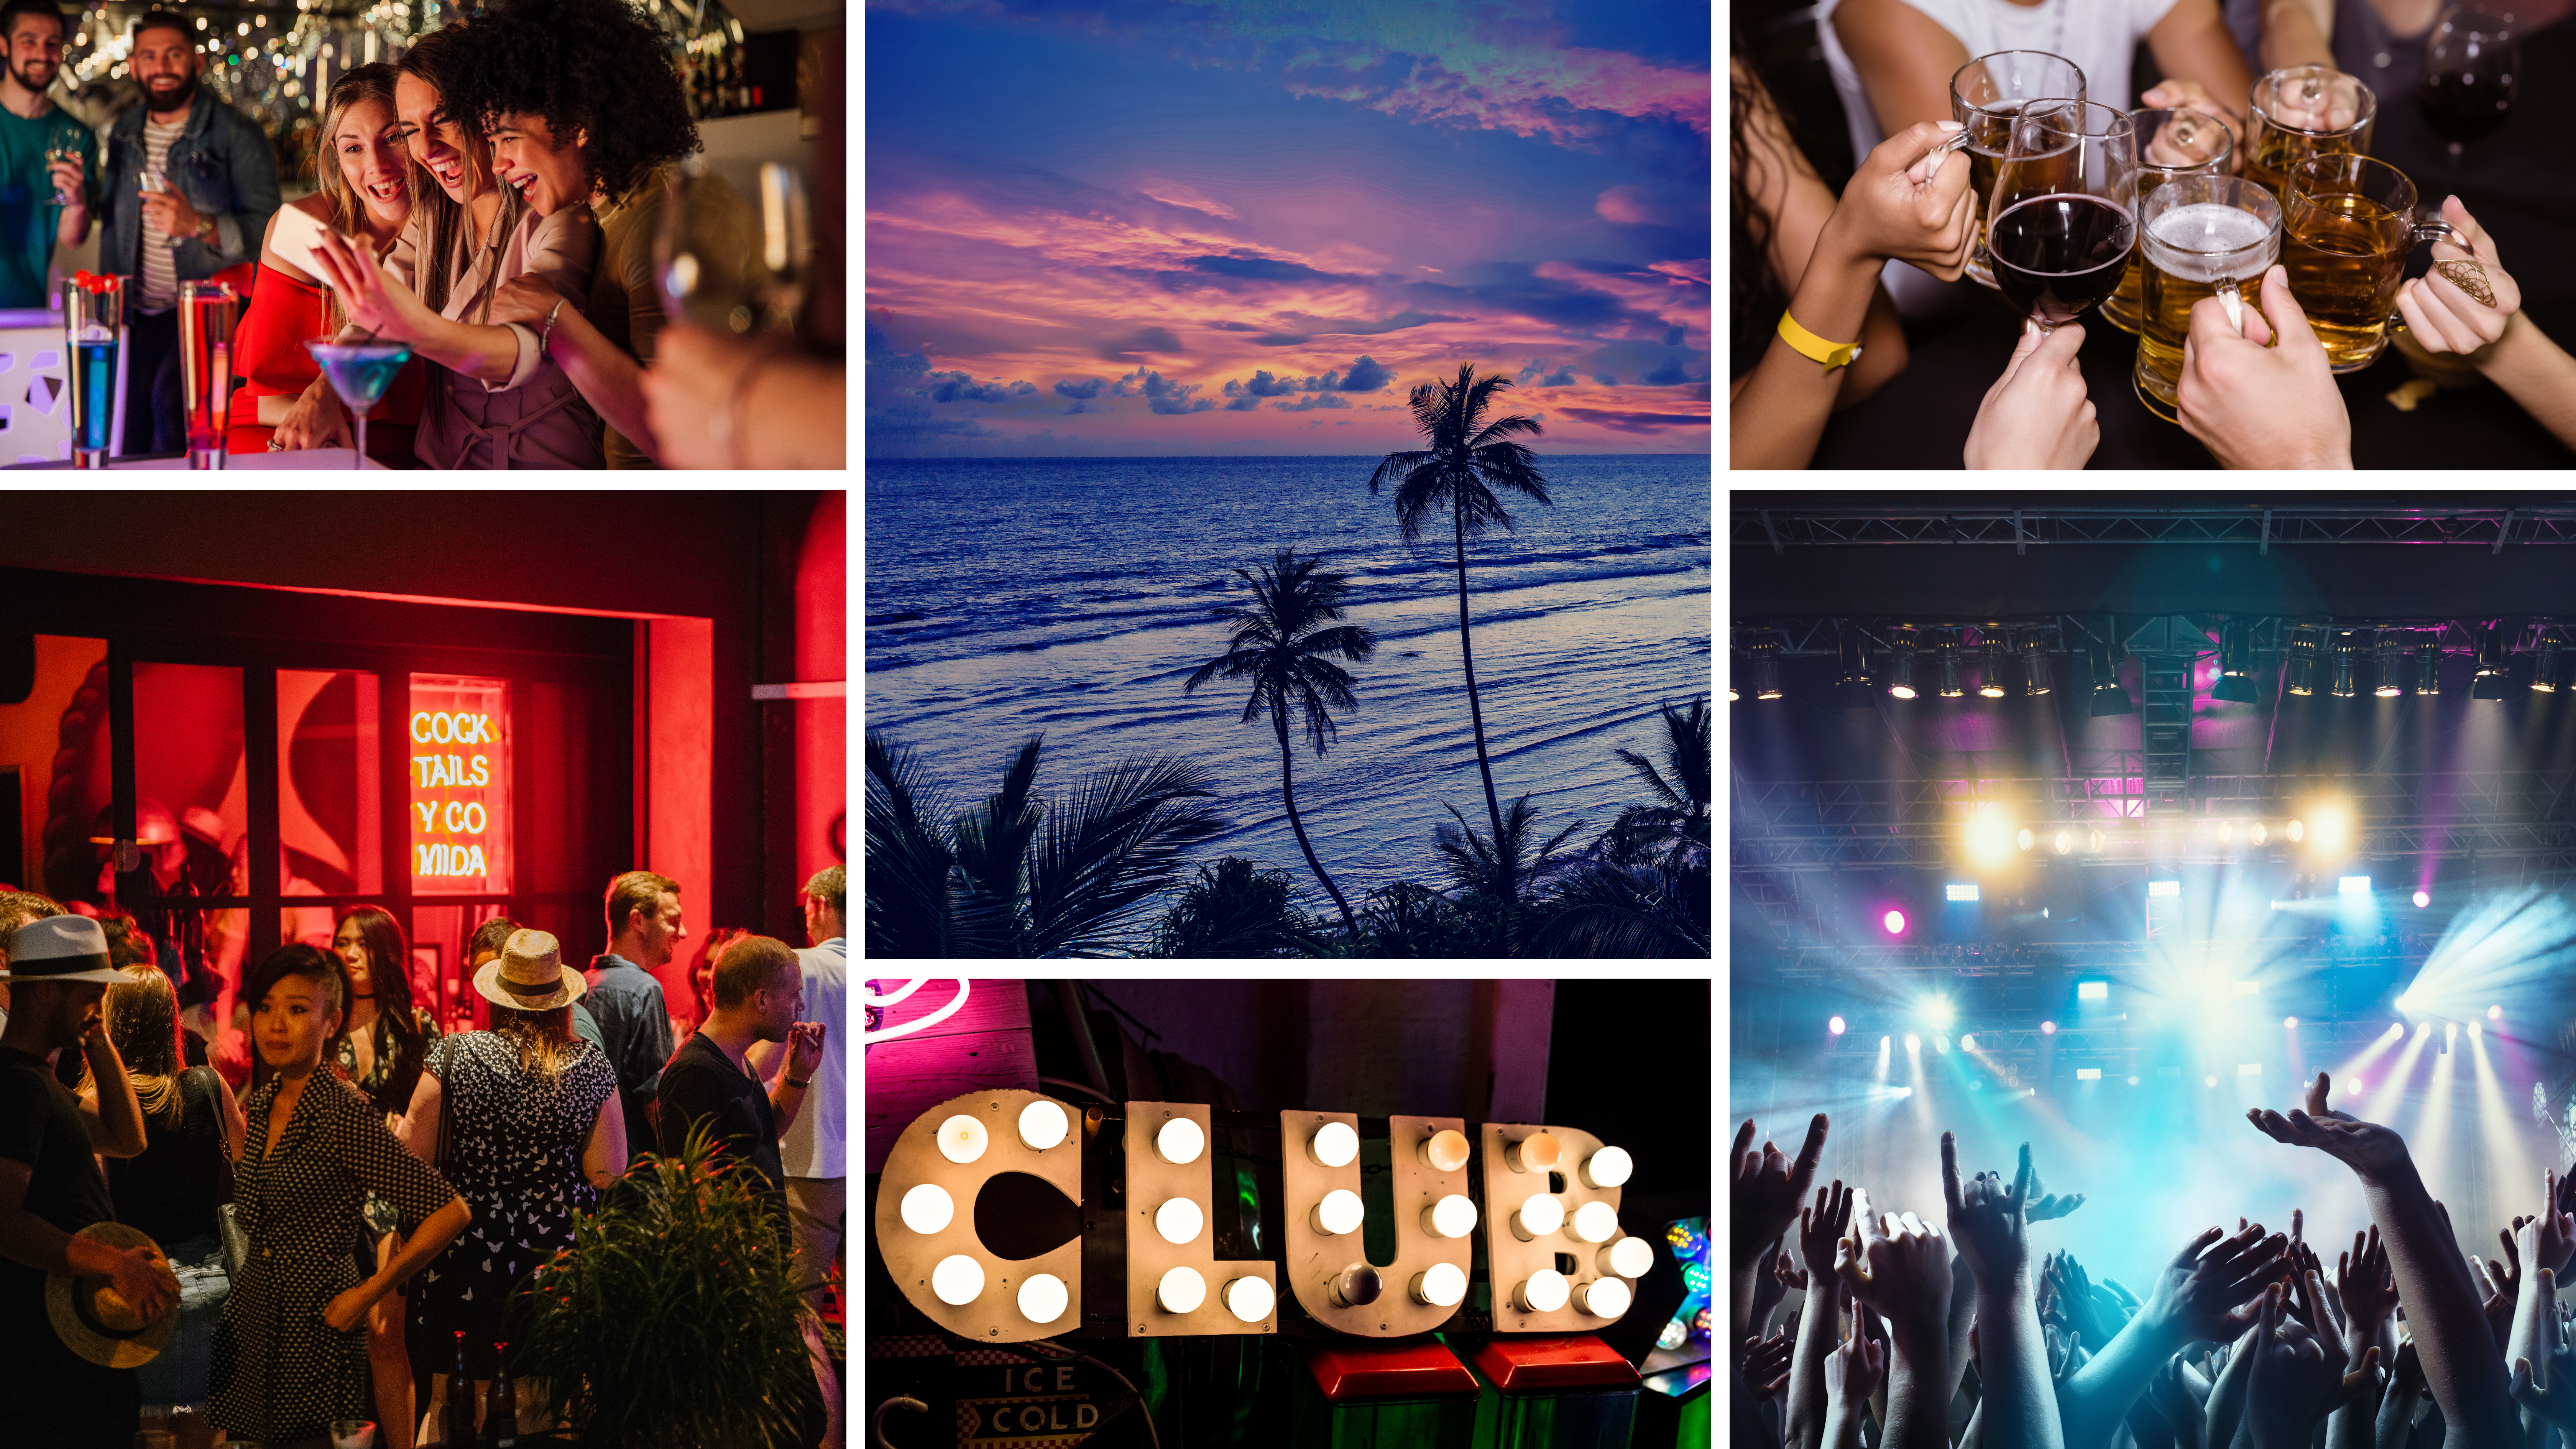 Top 10 Nightclubs to Visit in Goa